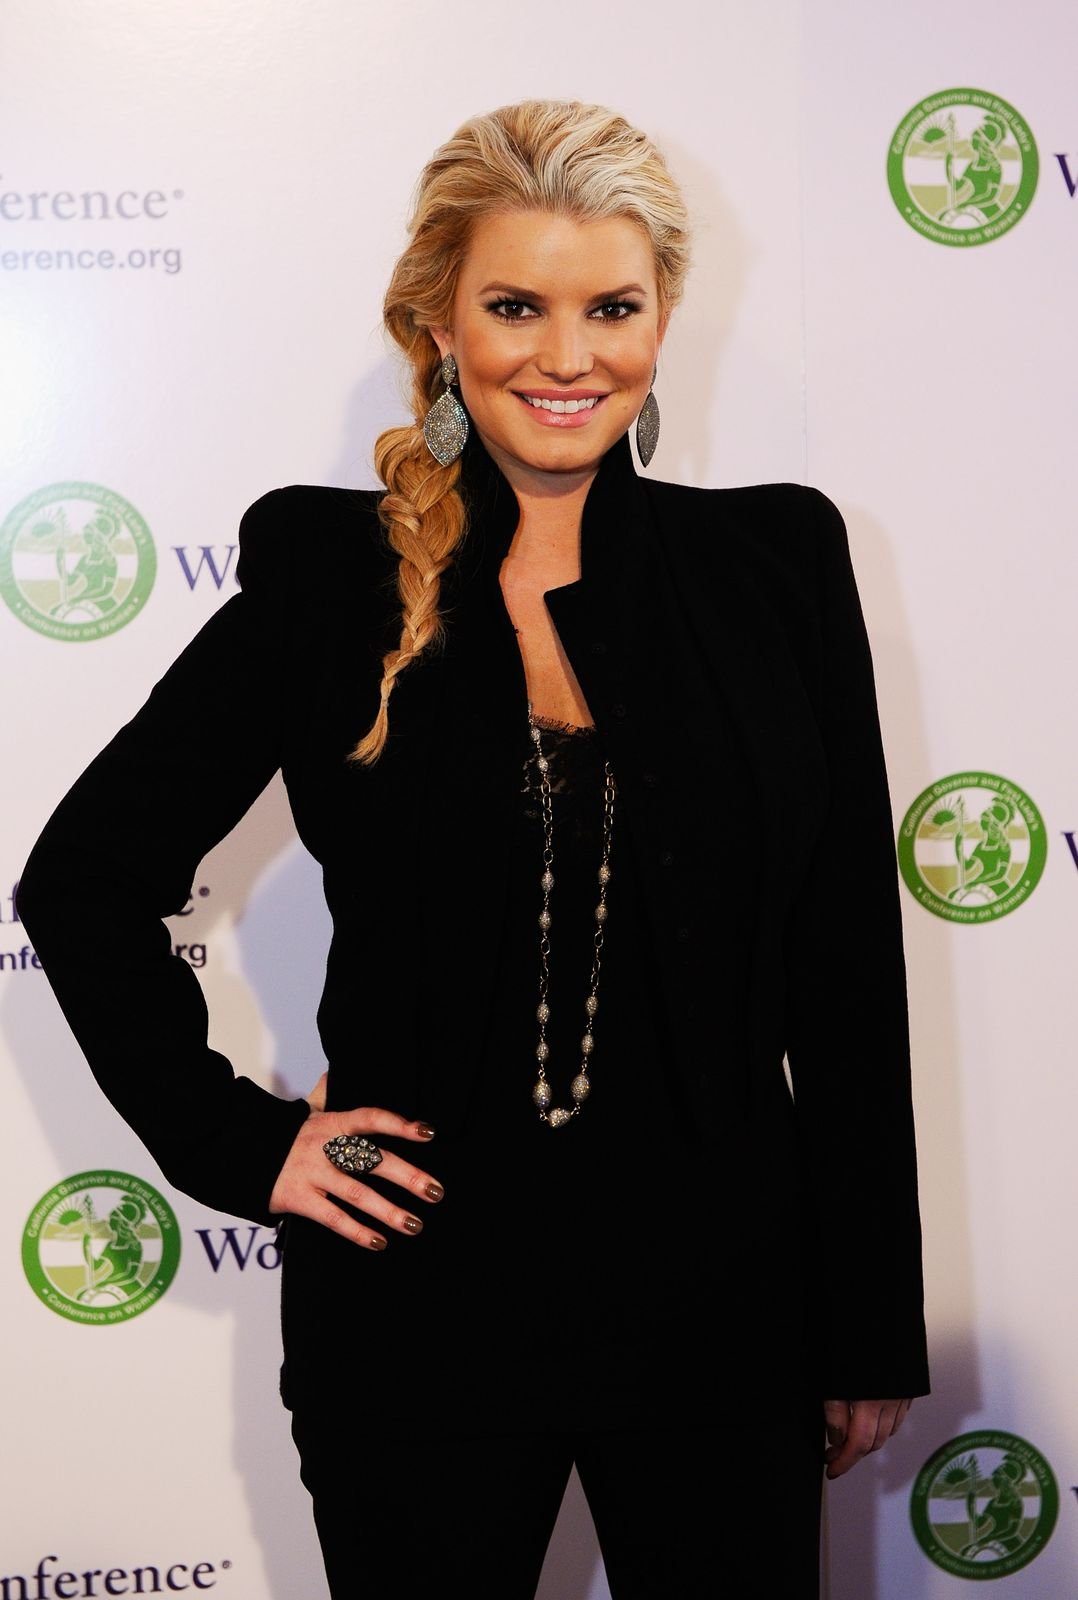 Jessica Simpson poses during California first lady Maria Shriver's annual Women's Conference 2010 on October 26, 2010 in Long Beach, California | Photo: Getty Images